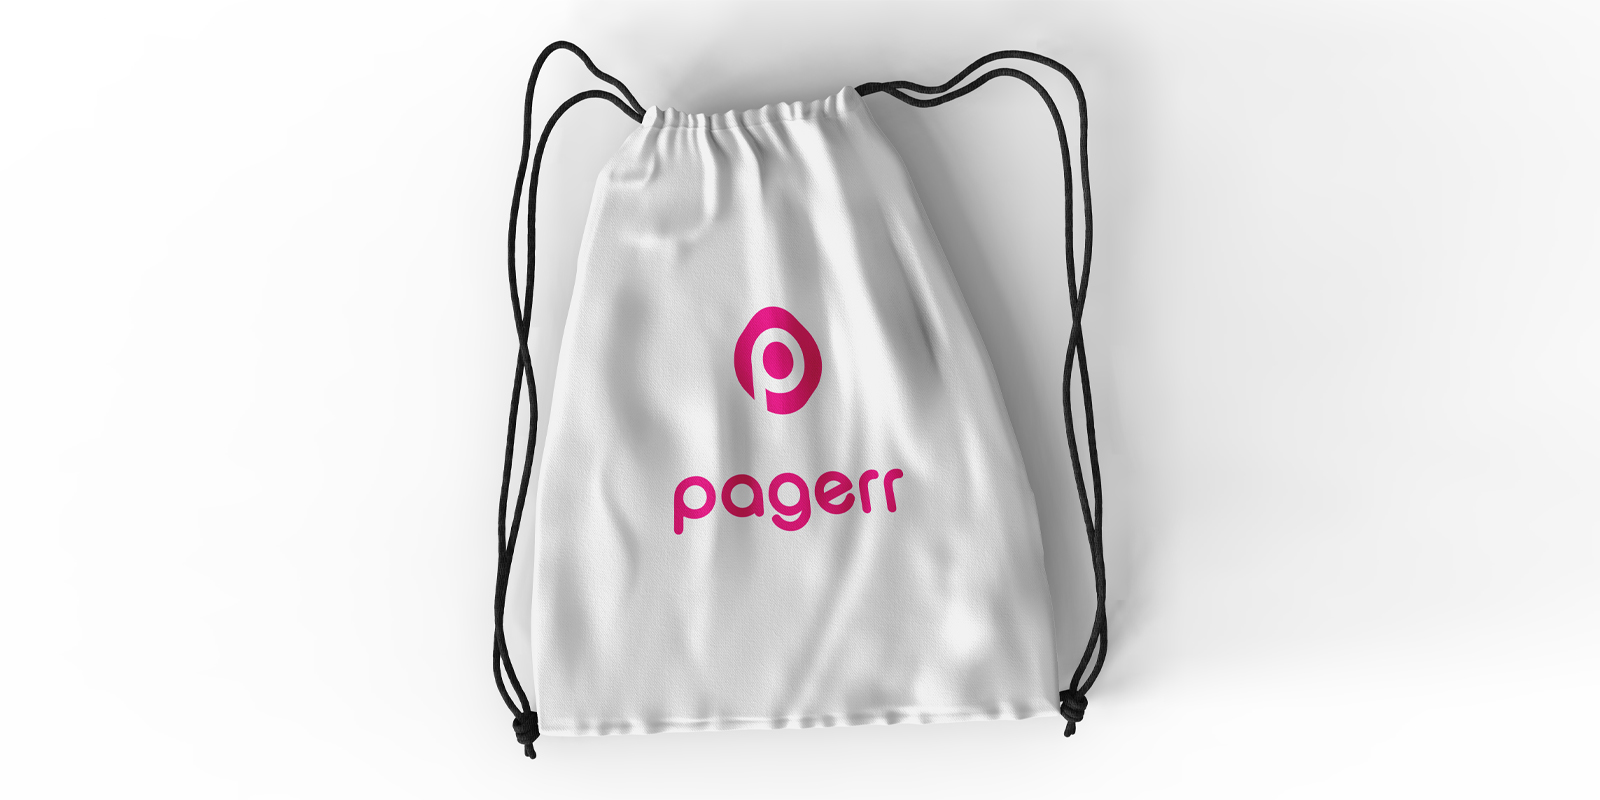 Drawstring backpacks in Canberra - Print with Pagerr